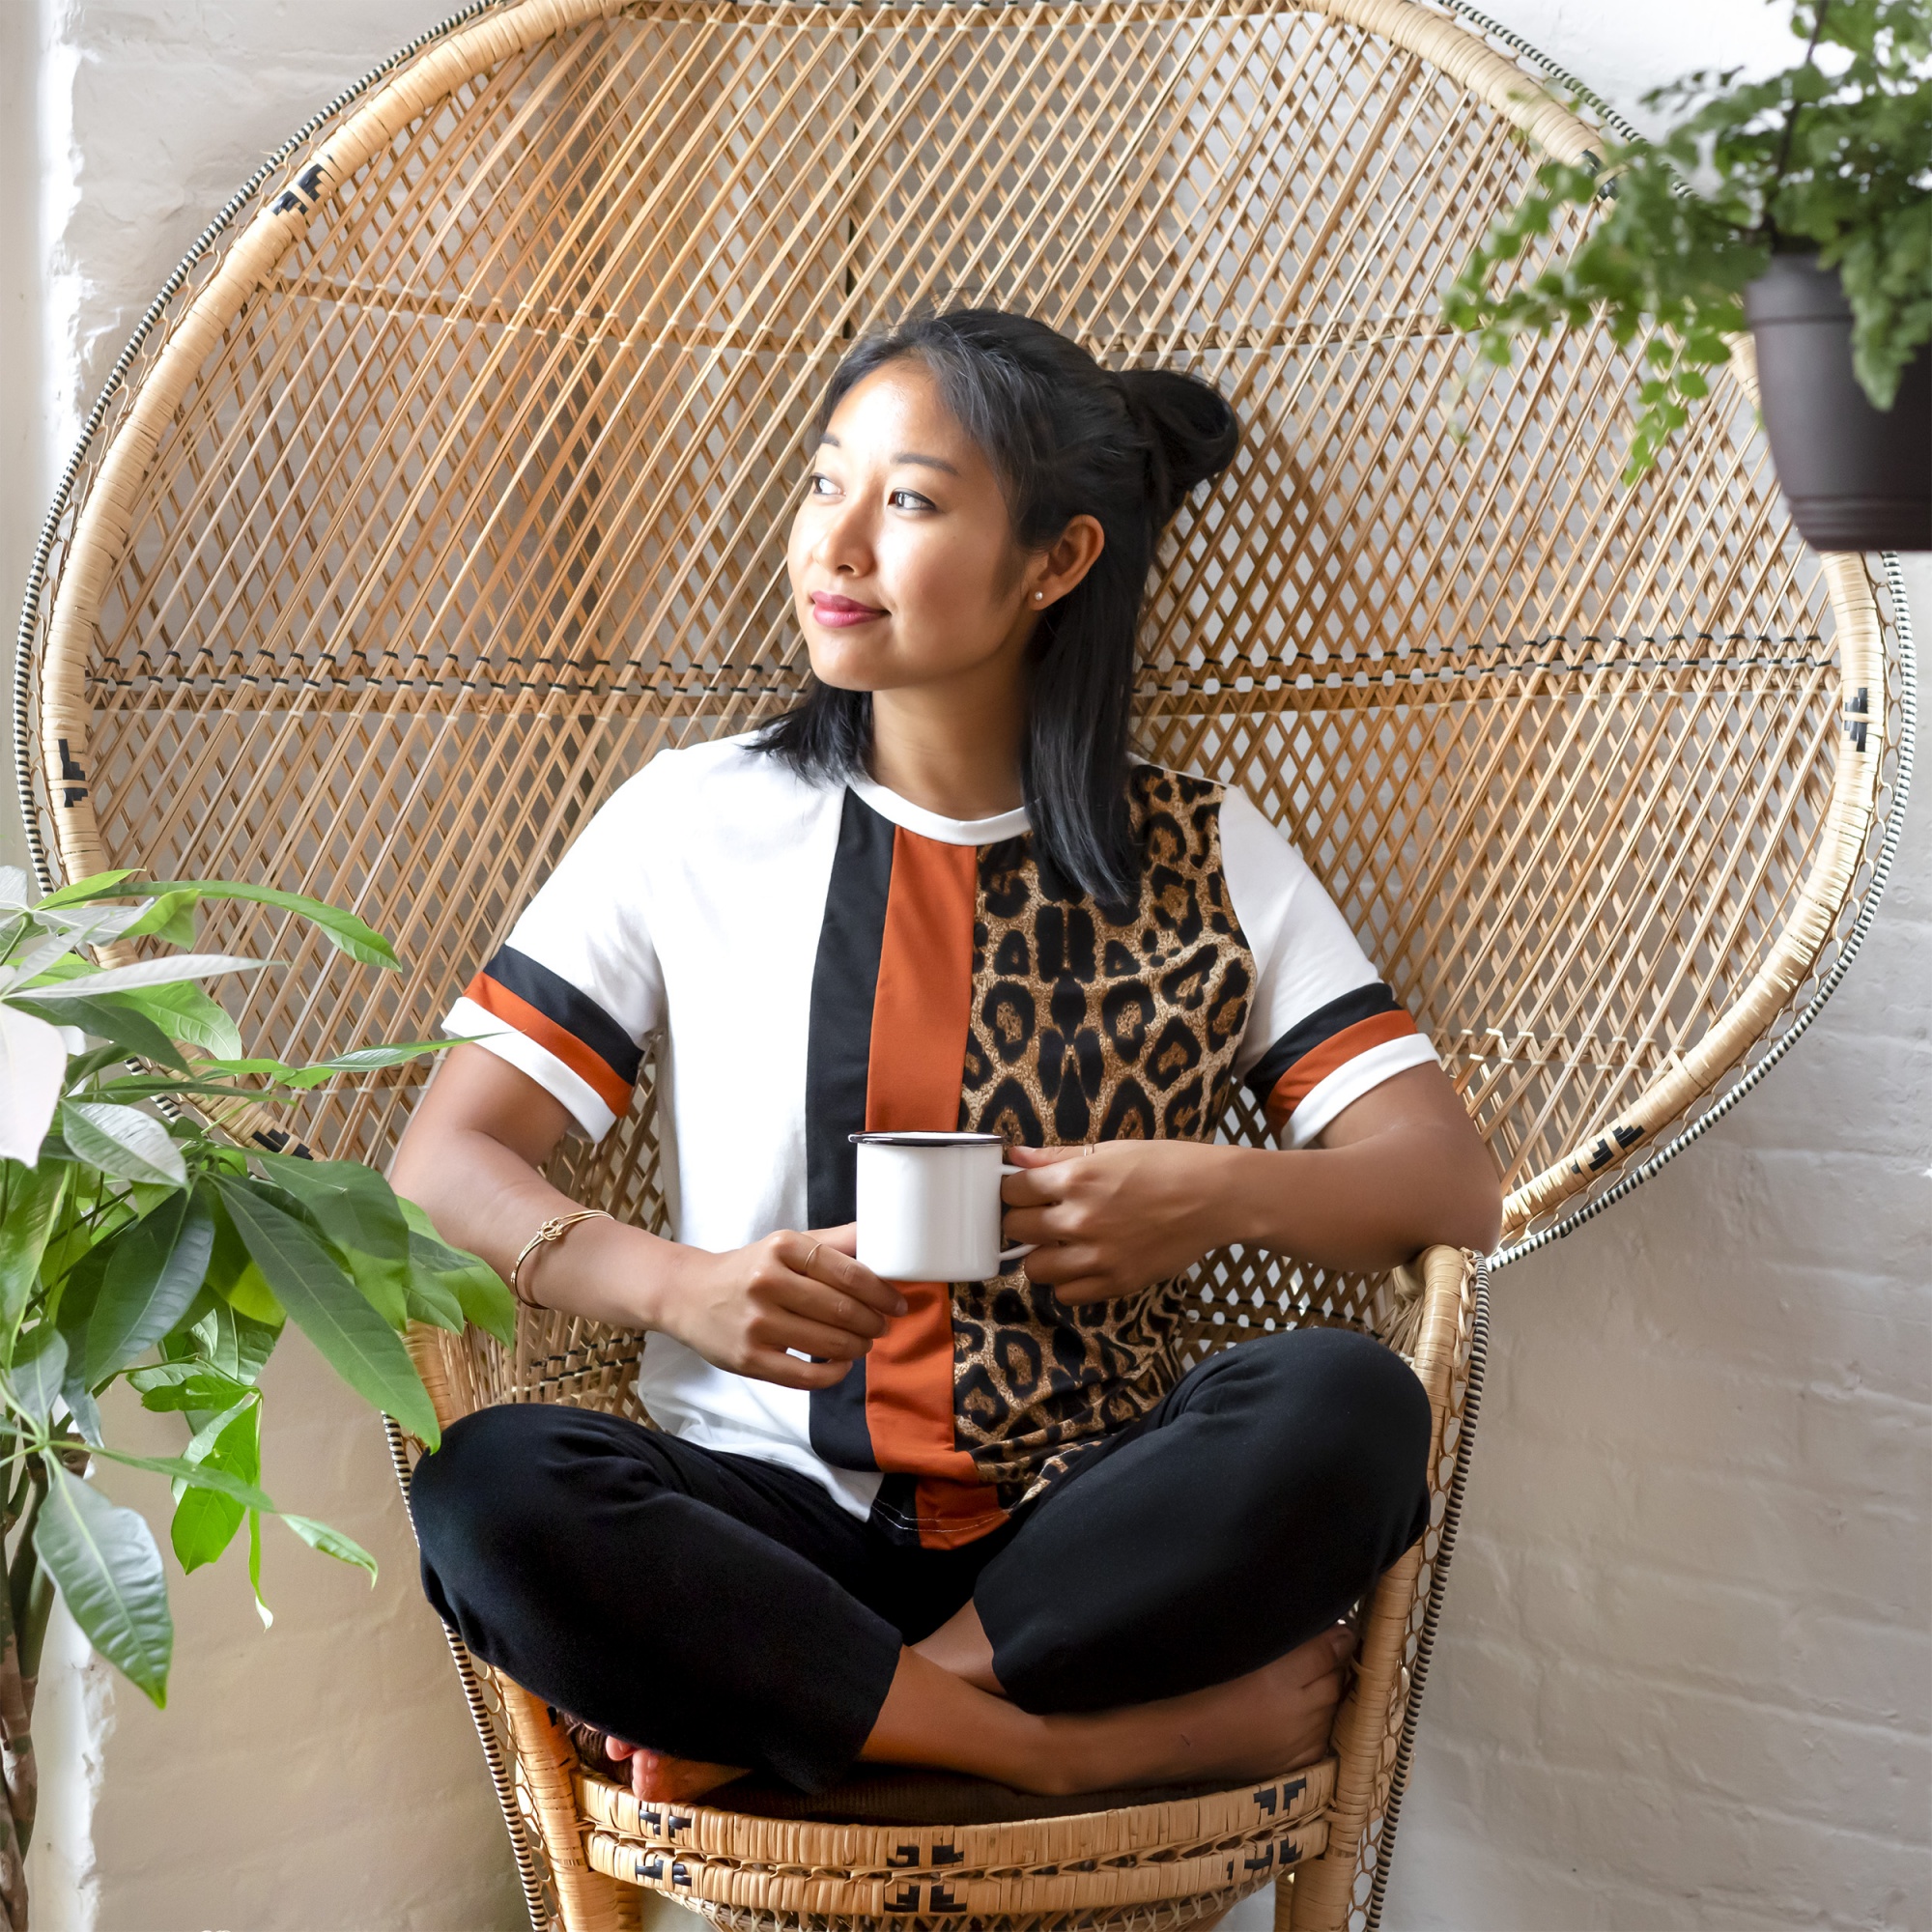 self-care and self-love, asian woman sitting crosslegged in rattan chair holding mug and thinking positive thoughts, best breathing techniques, breathing exercises, breathing exercises for stress, deep abdominal breathing, stimulating breath, bellows breath, equal breathing, sama vritti, 4 7 8 breathing, relaxing breath, breath counting, progressive relaxation breathing, erin busbee, busbee style, miraval breathing exercises, breathwork, mindful breathing